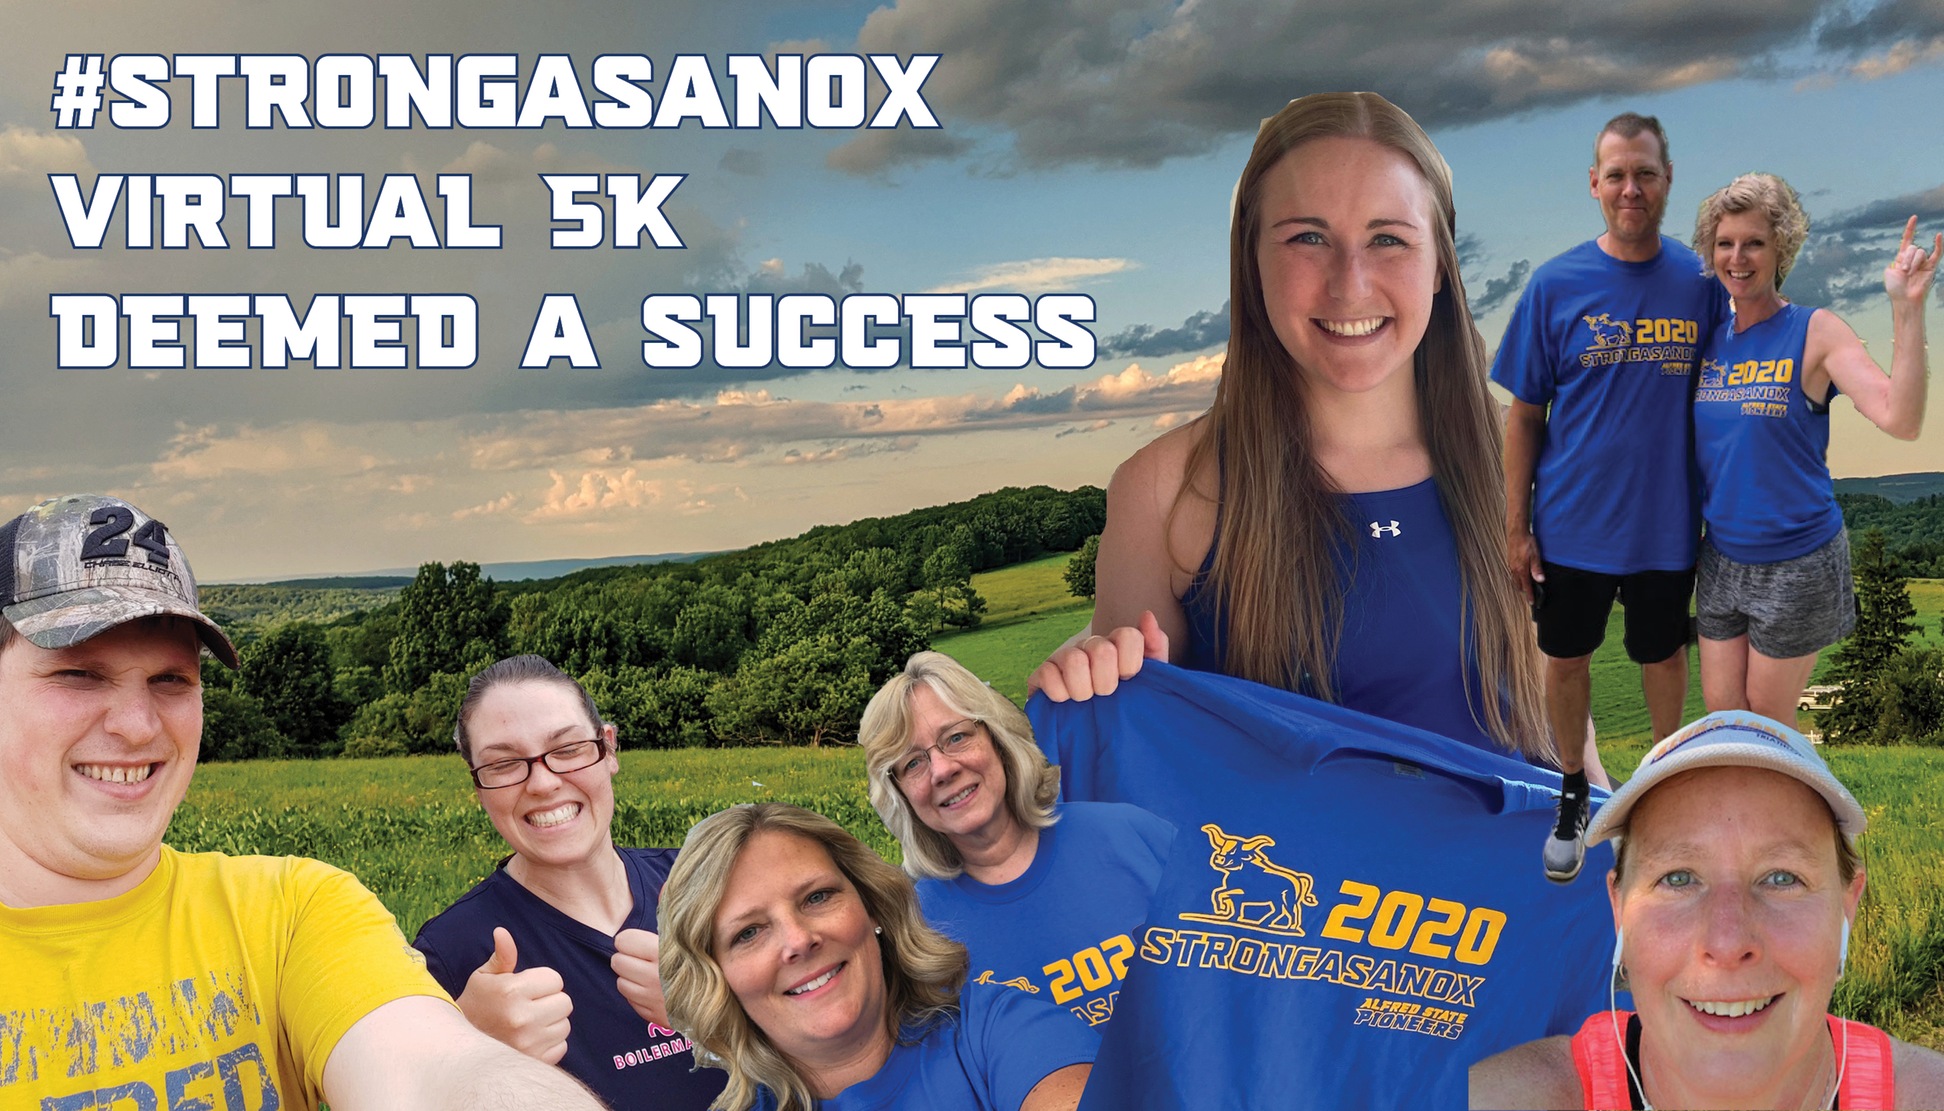 StrongASanOX Virtual 5K deemed a success - the picture displays some of the participants of the event